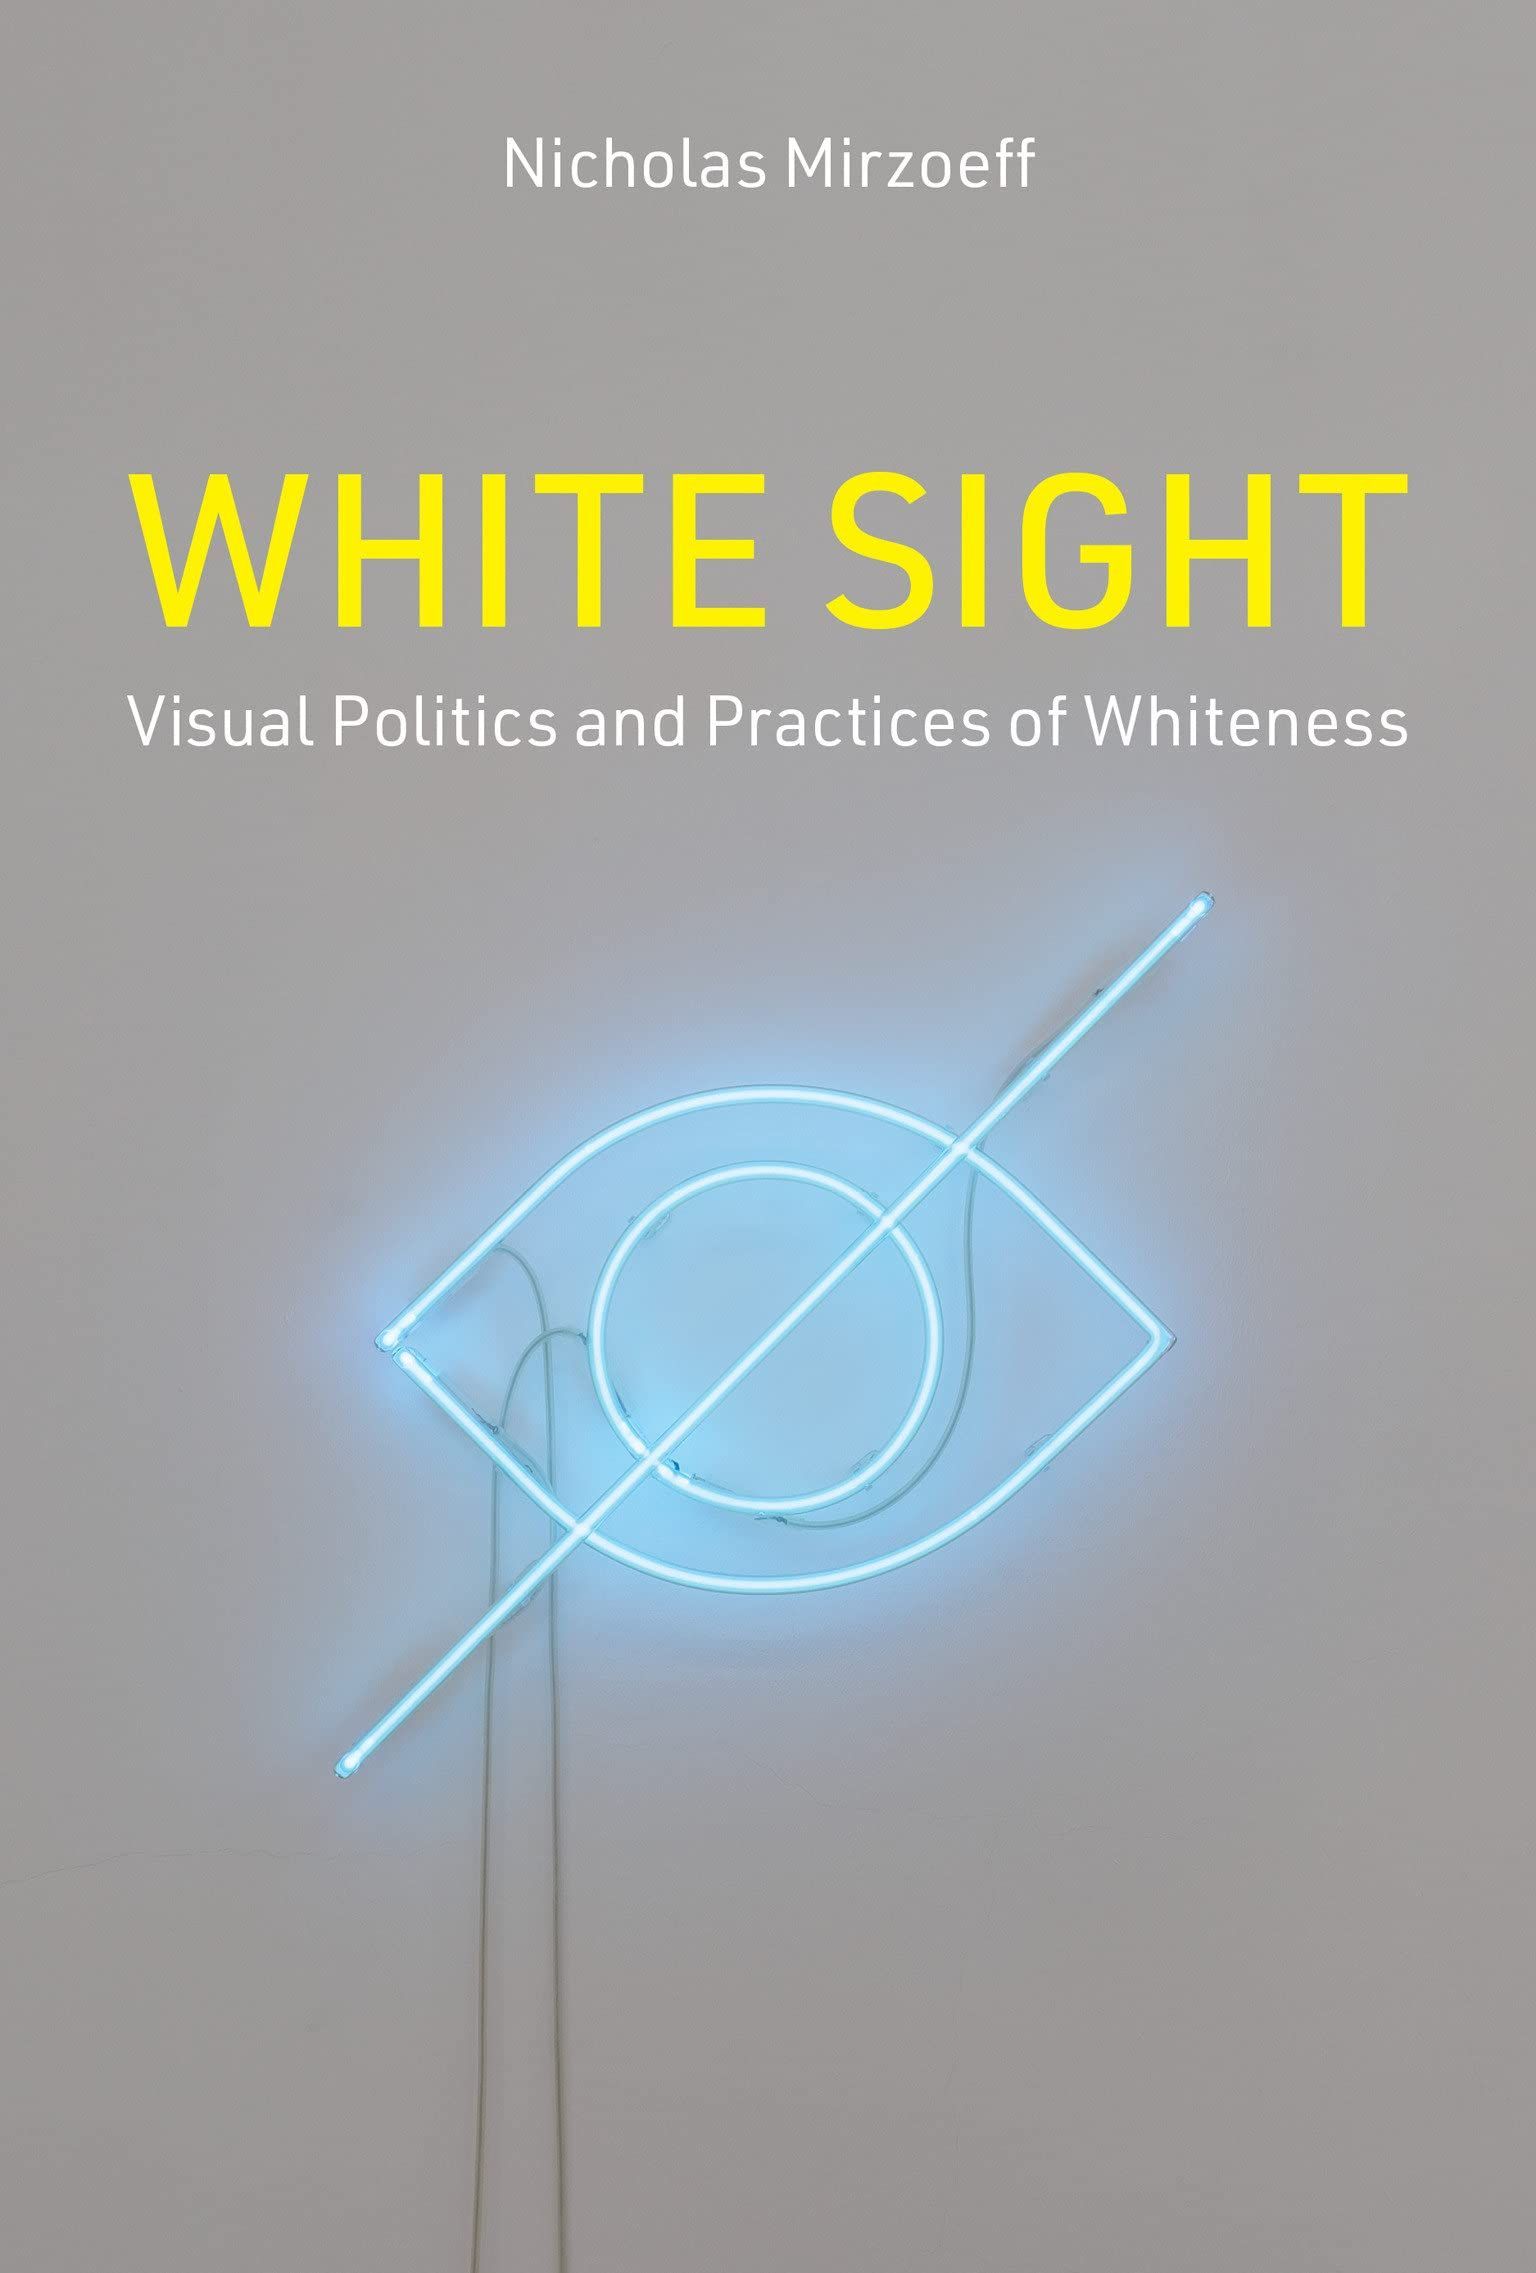 The General Crisis of Whiteness: A Conversation with Nicholas Mirzoeff